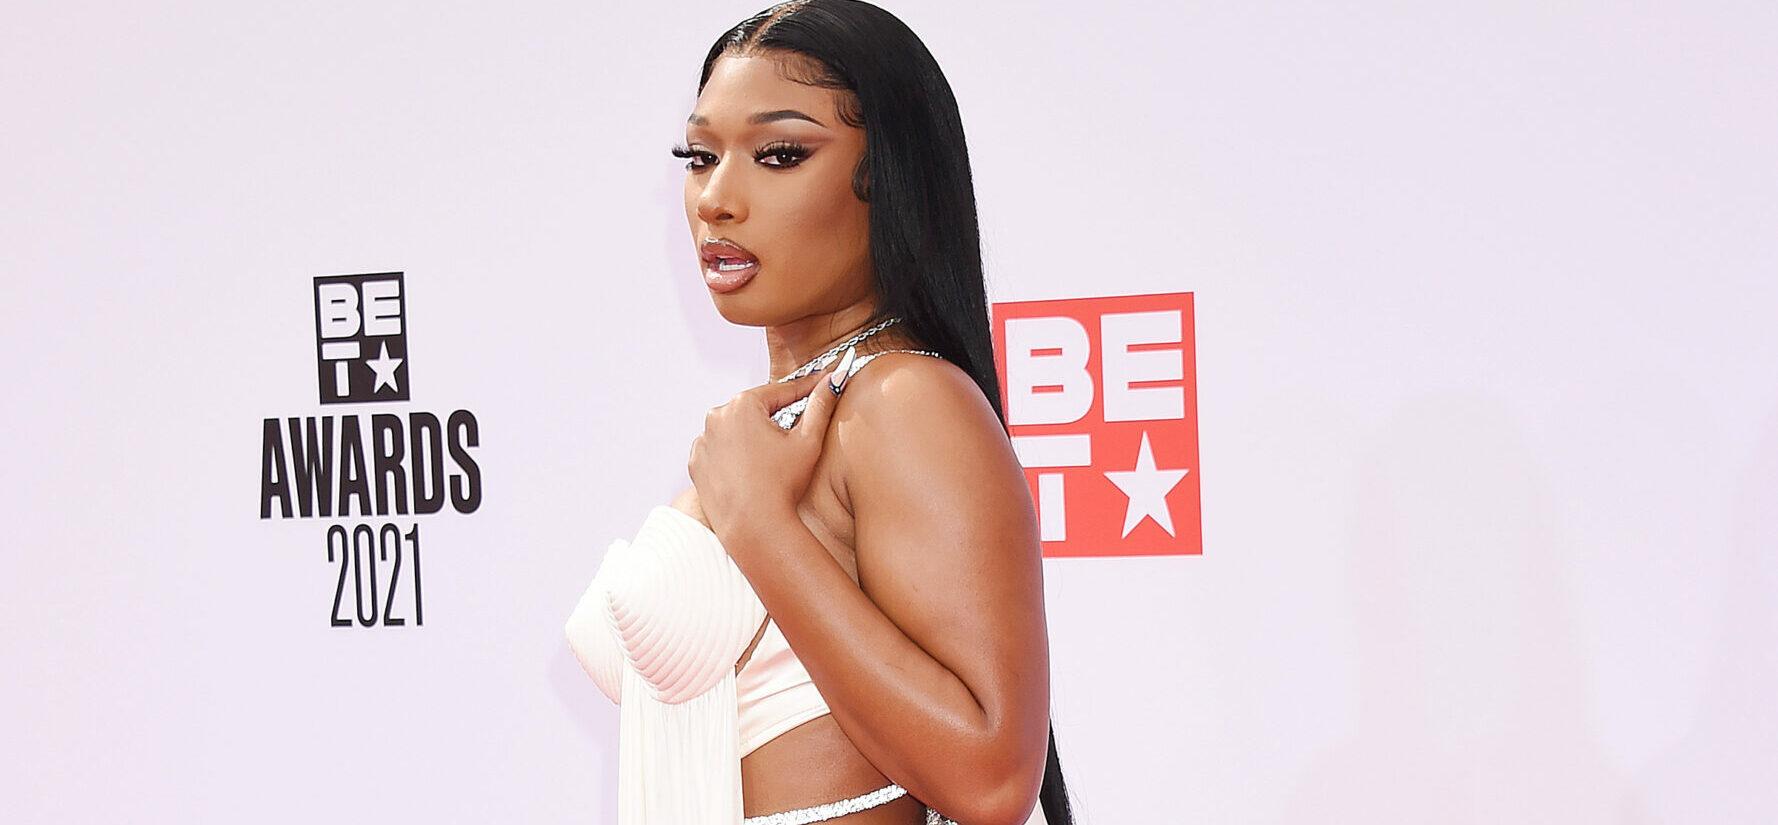 Megan Thee Stallion SLAMS Record Label, They Are 'Grown Men Bullying Me!'